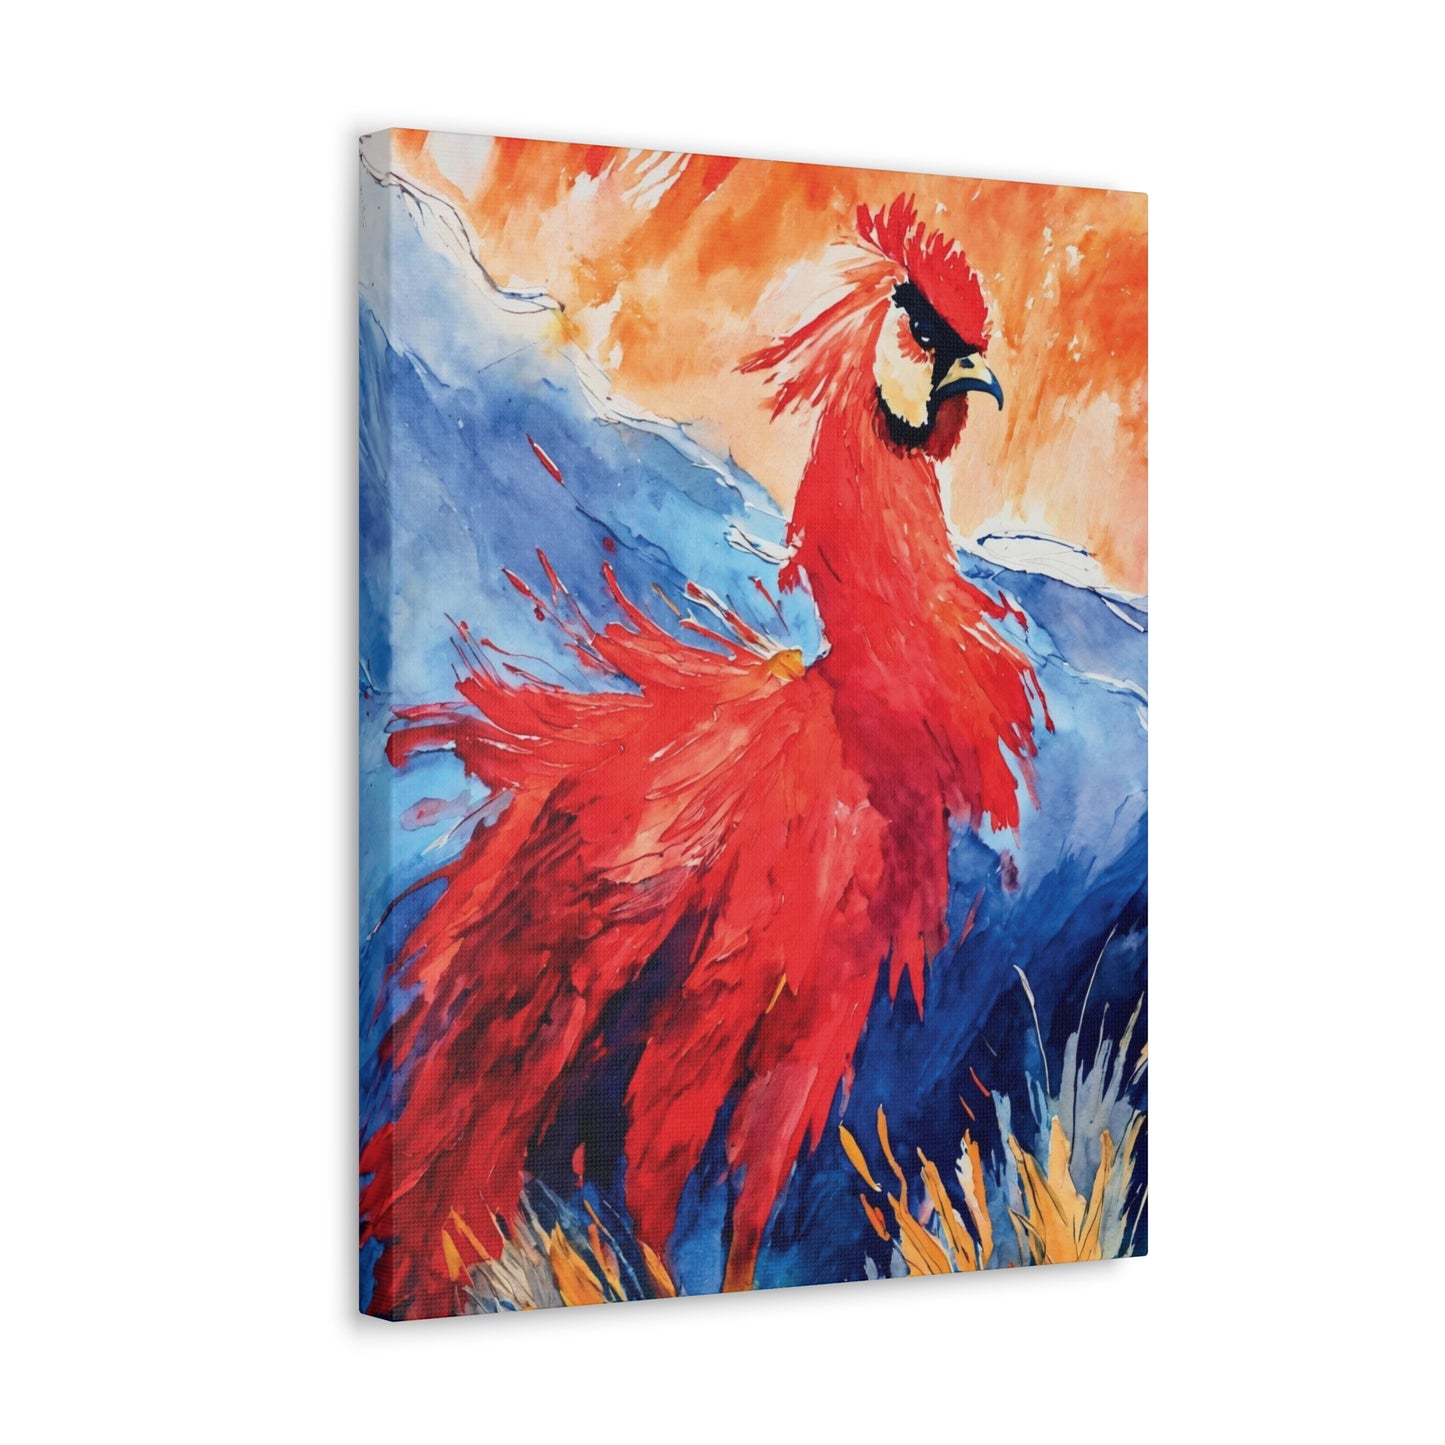 “A Rooster’s Spirited Nature”